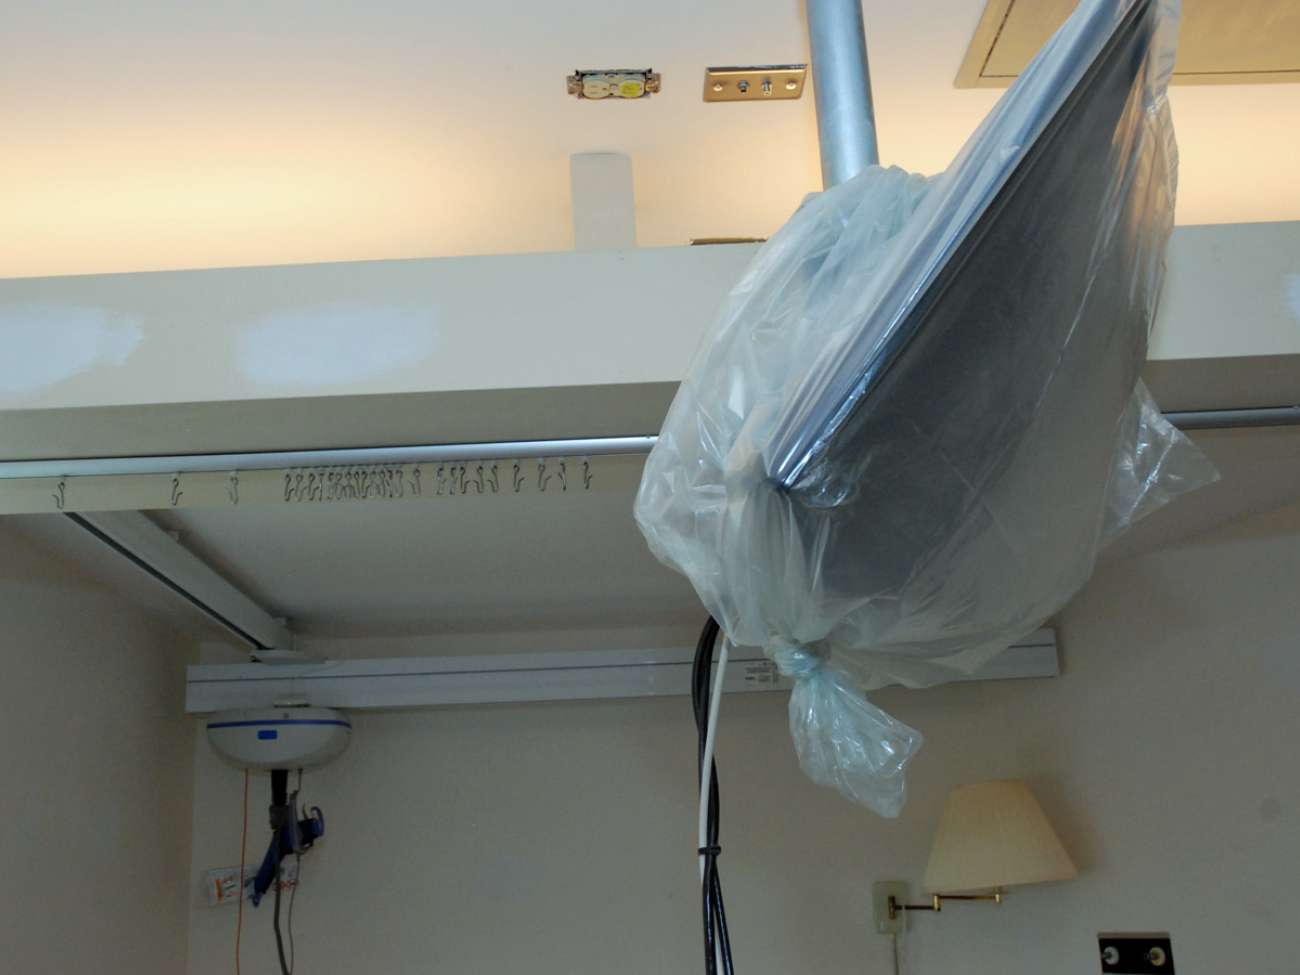 As GRH completes health infrastructure renovations, new patient lifts and televisions are being installed.